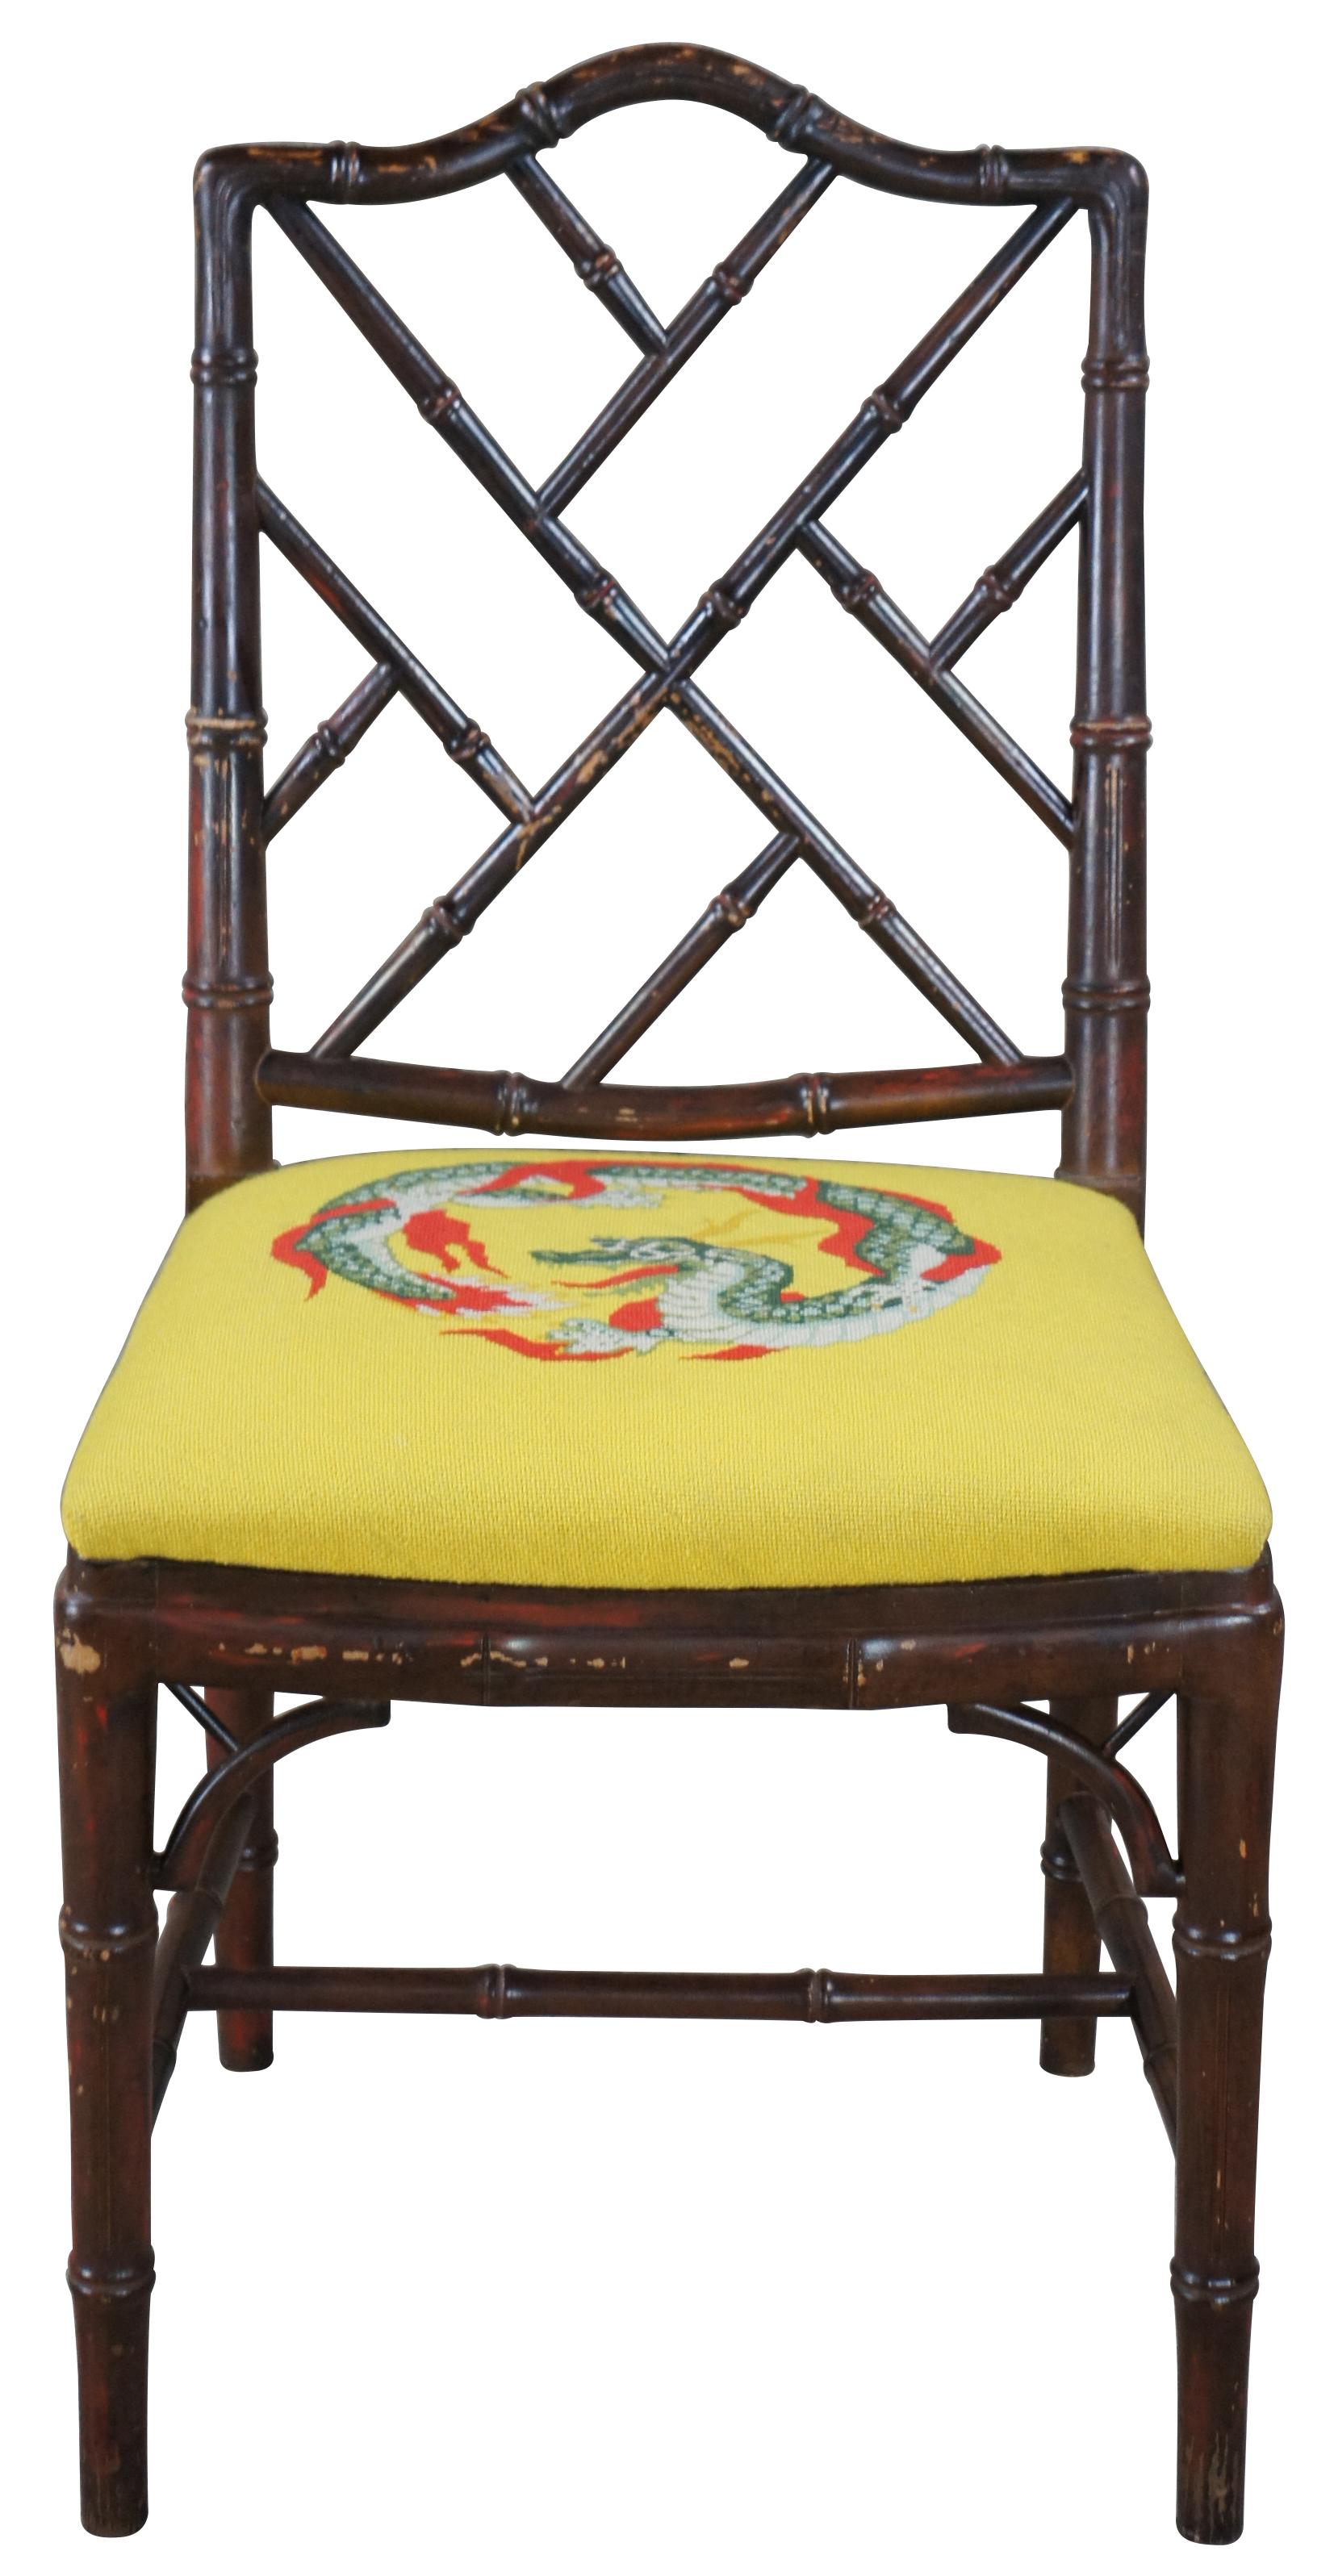 Kindel faux bamboo side chair, circa 1970s. Features a distressed hardwood frame with yellow upholstered dragon seat.

Kindel Grand Rapids has maintained family ownership and is committed to keeping this niche of luxury, handcrafted furniture made